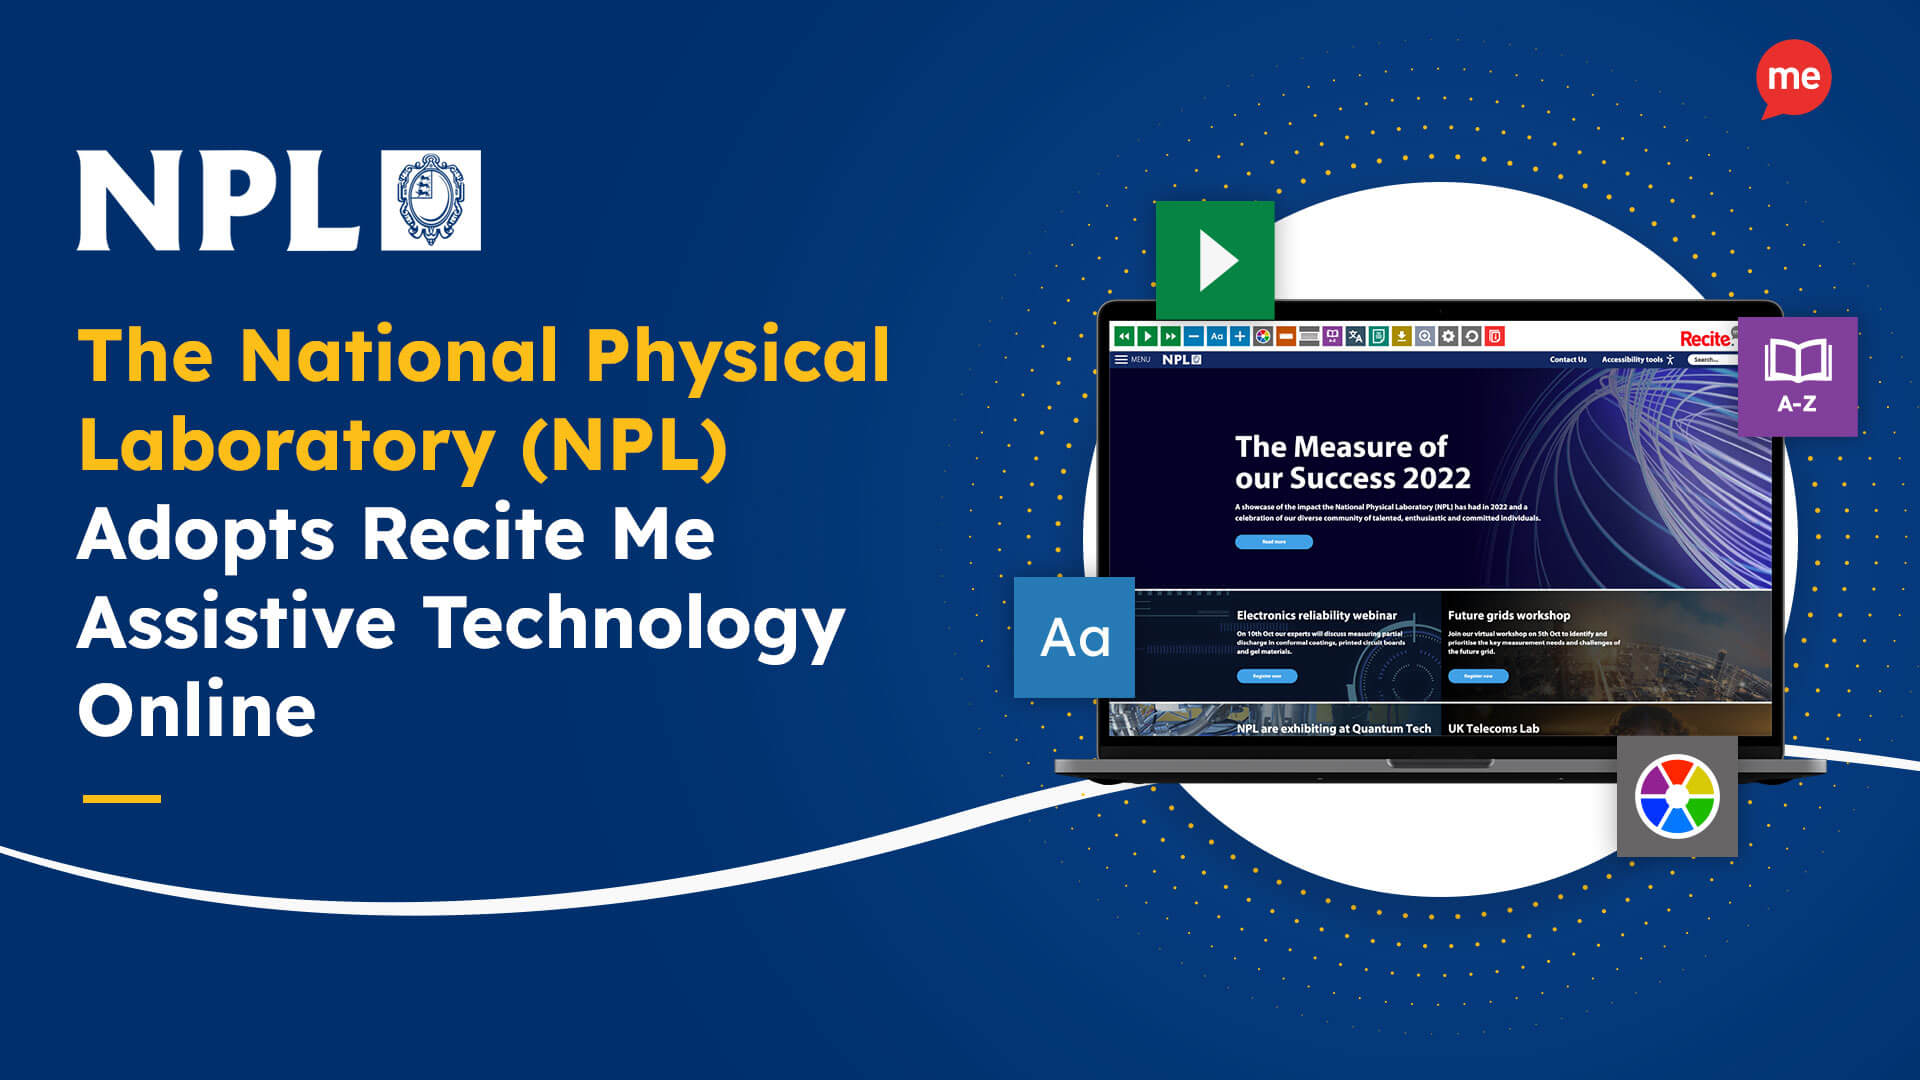 The National Physical Laboratory (NPL) Adopts Recite Me Assistive Technology Online